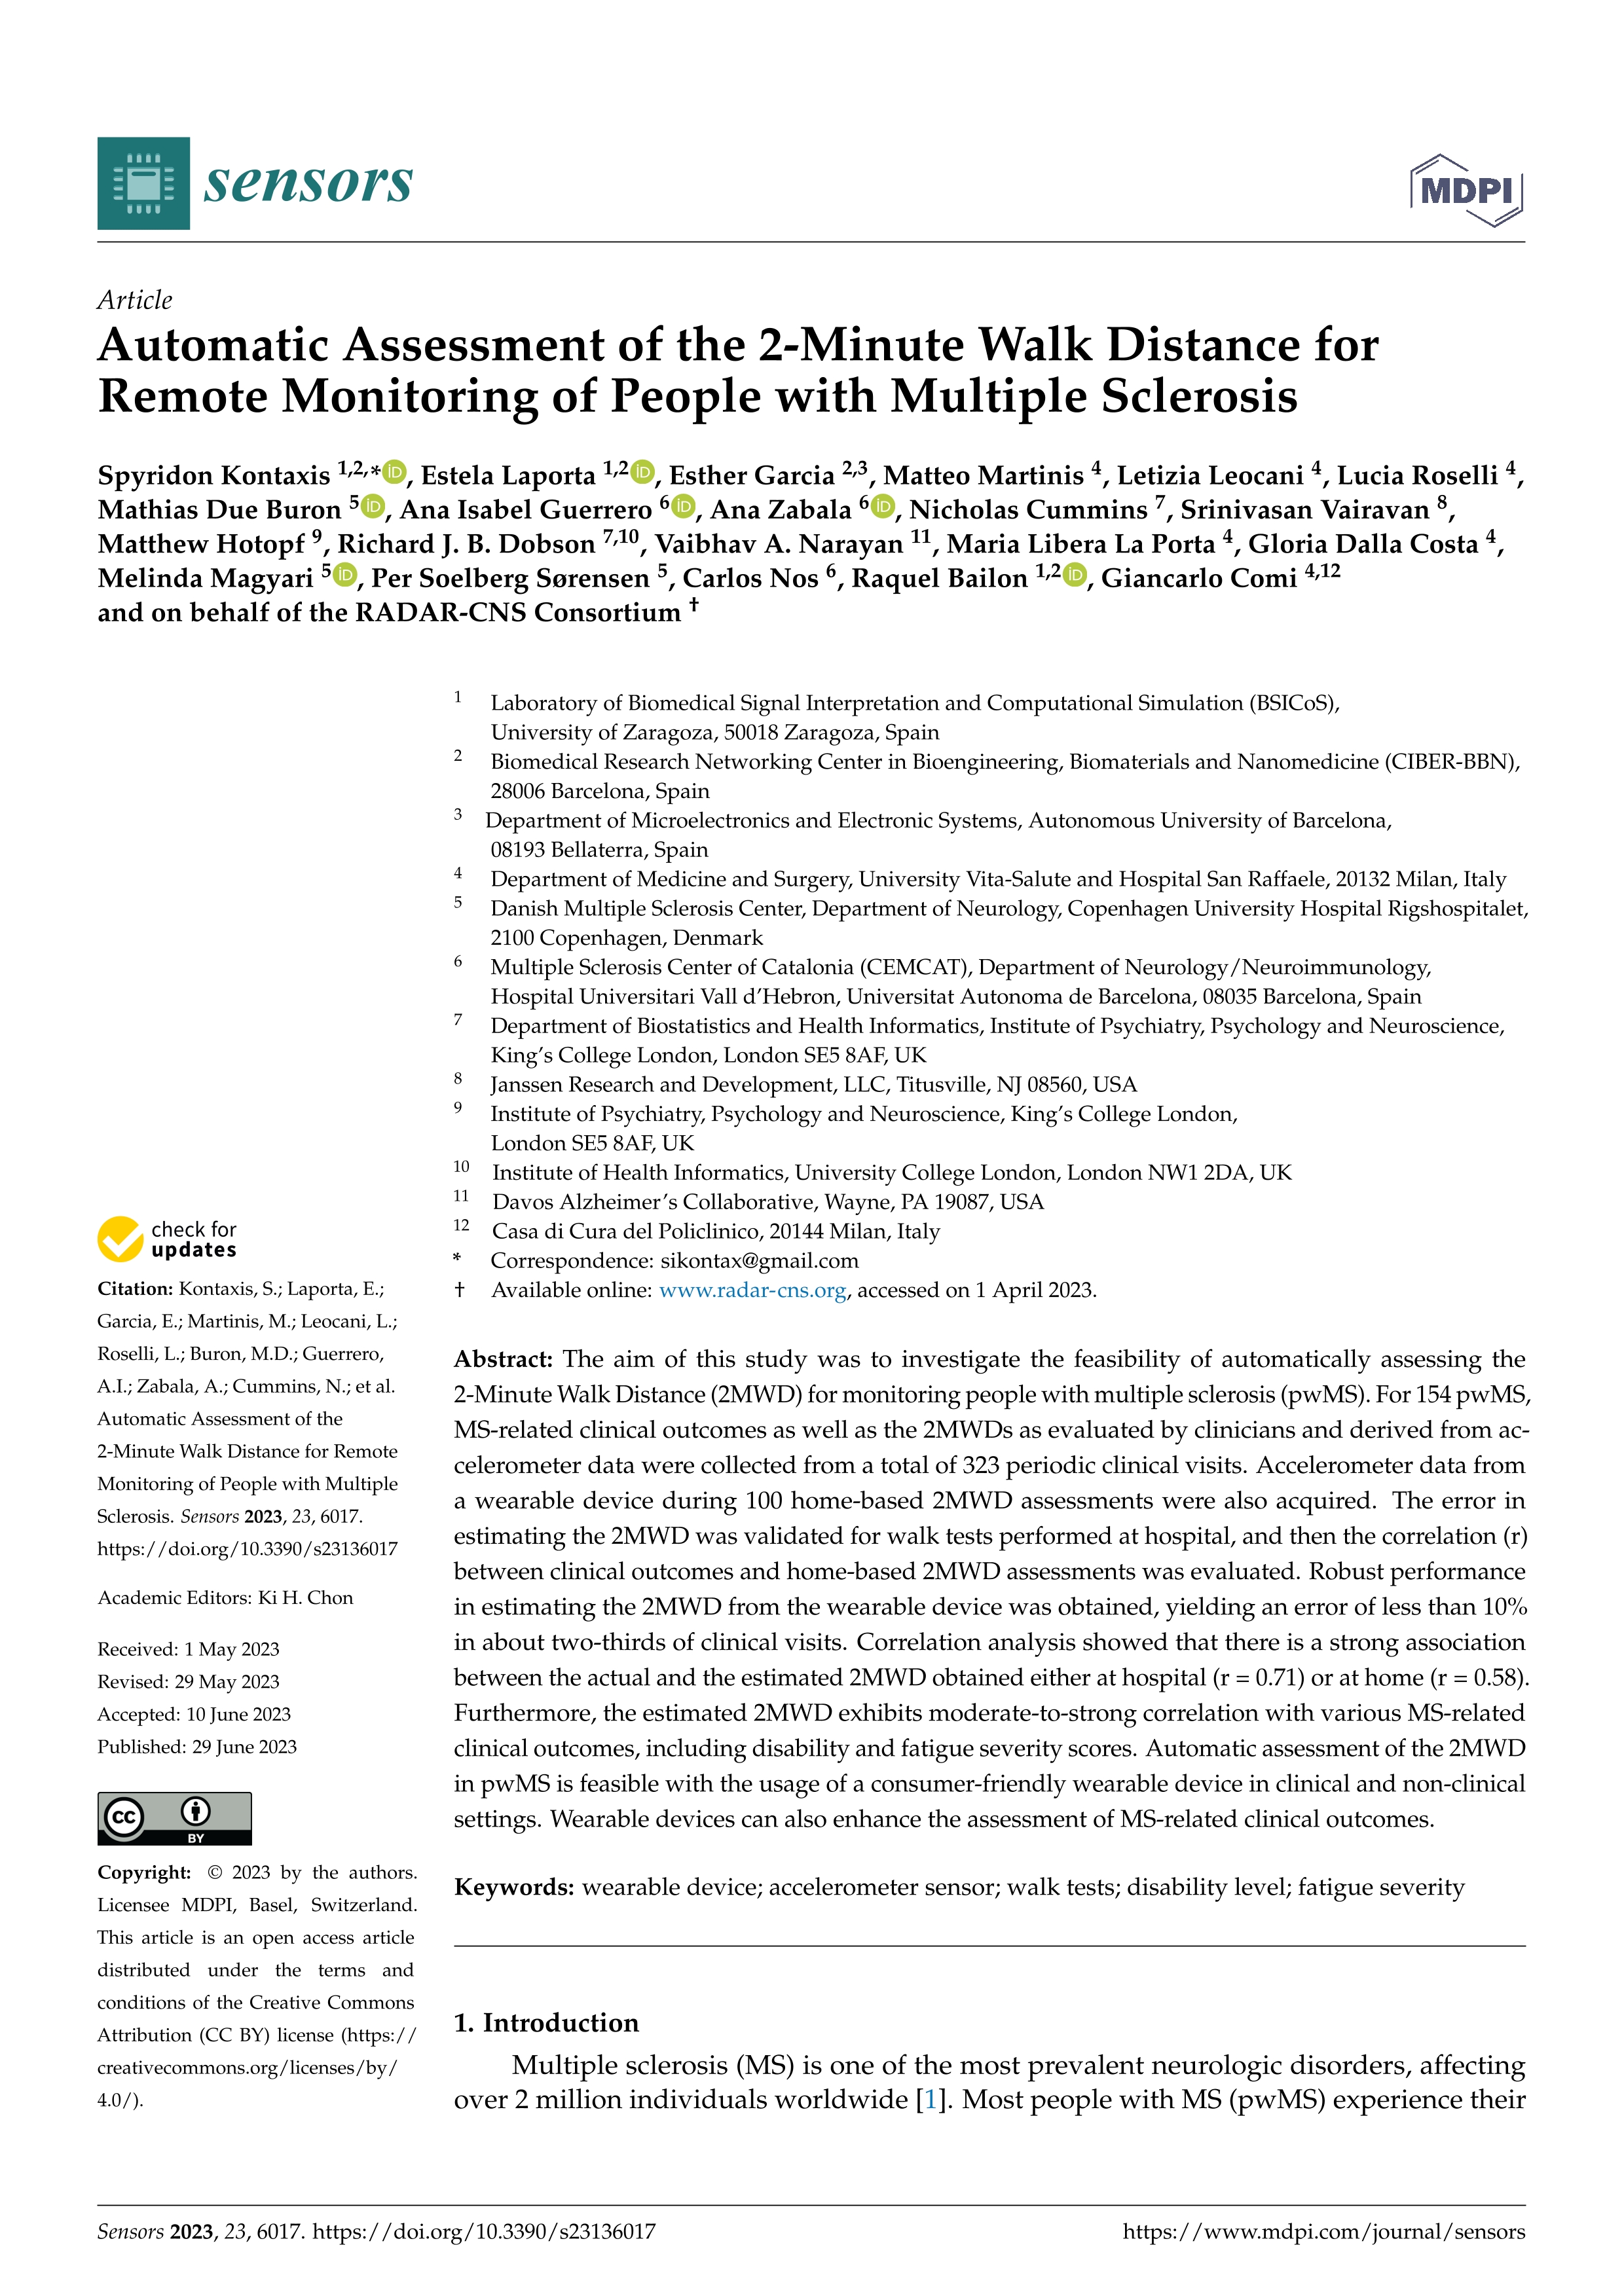 Automatic assessment of the 2-minute walk distance for remote monitoring of people with multiple sclerosis